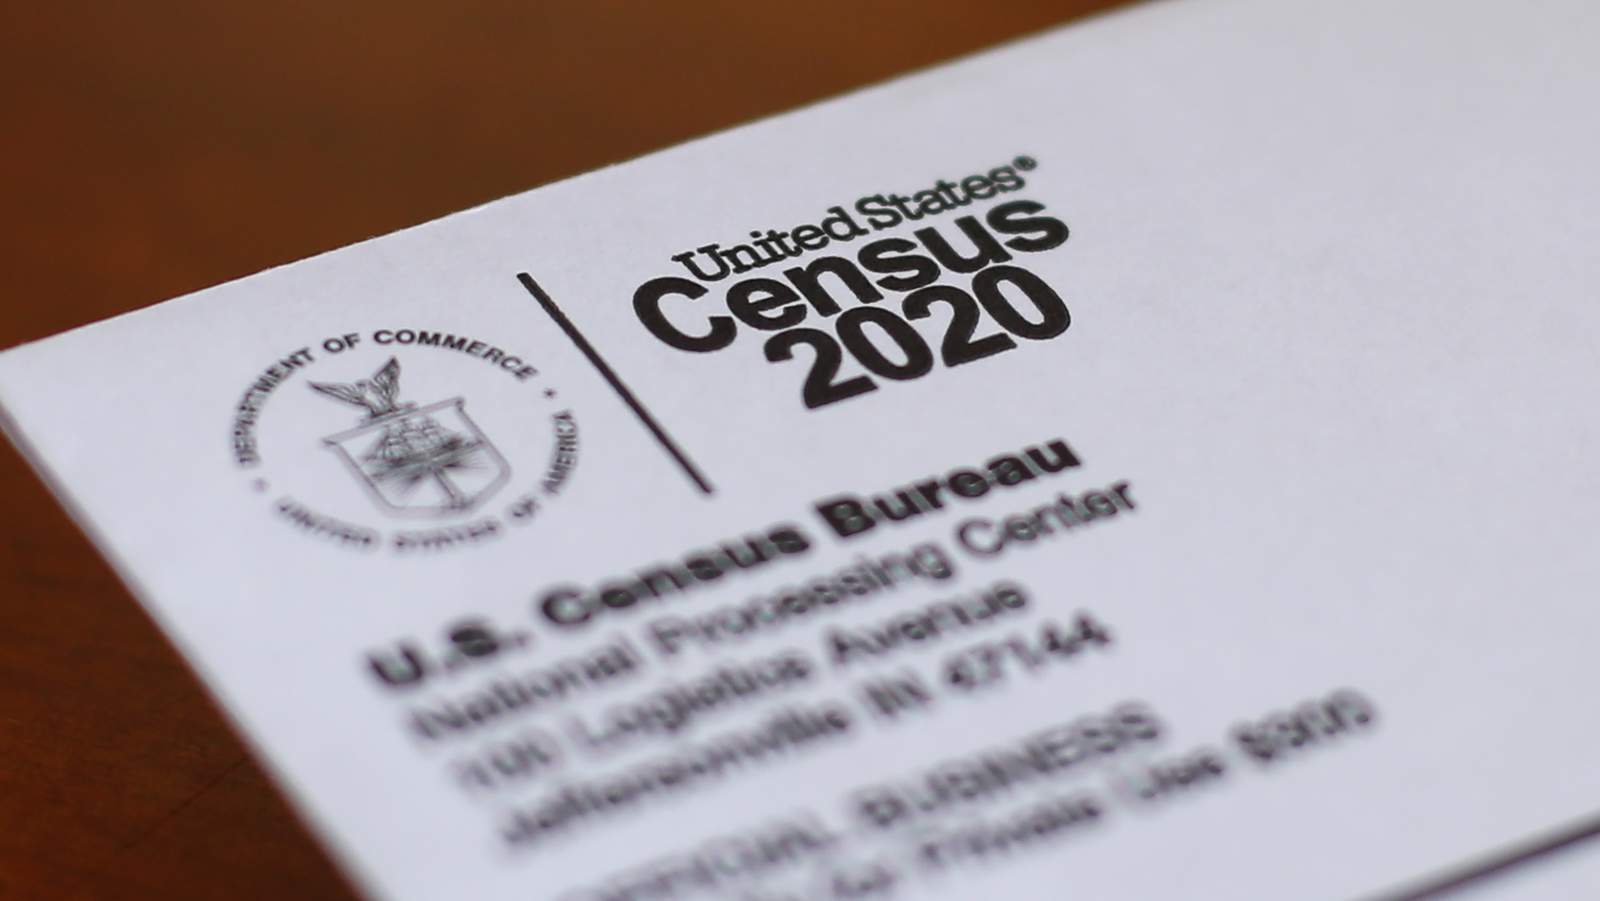 Census document says cutting steps risks errors in count